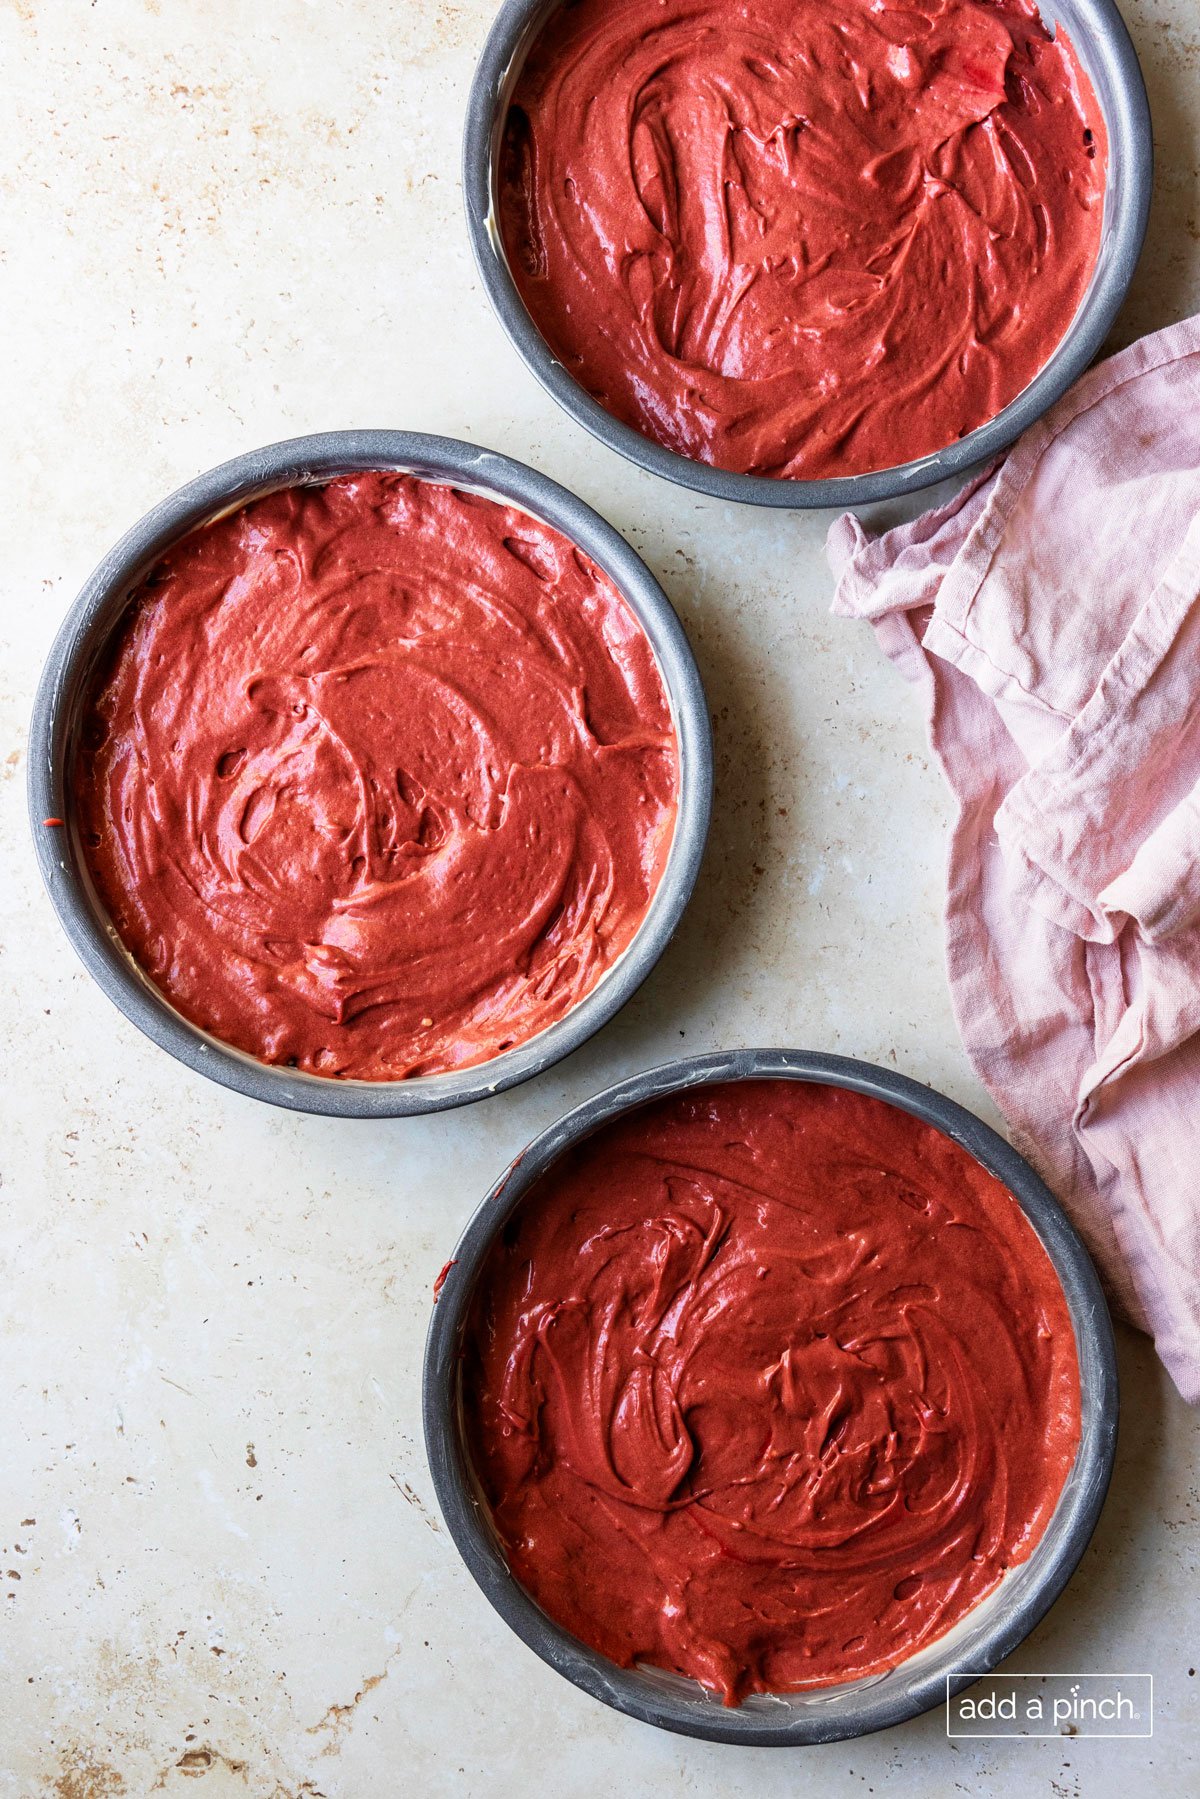 Photograph of red velvet cake batter evenly distributed in three cake pans.